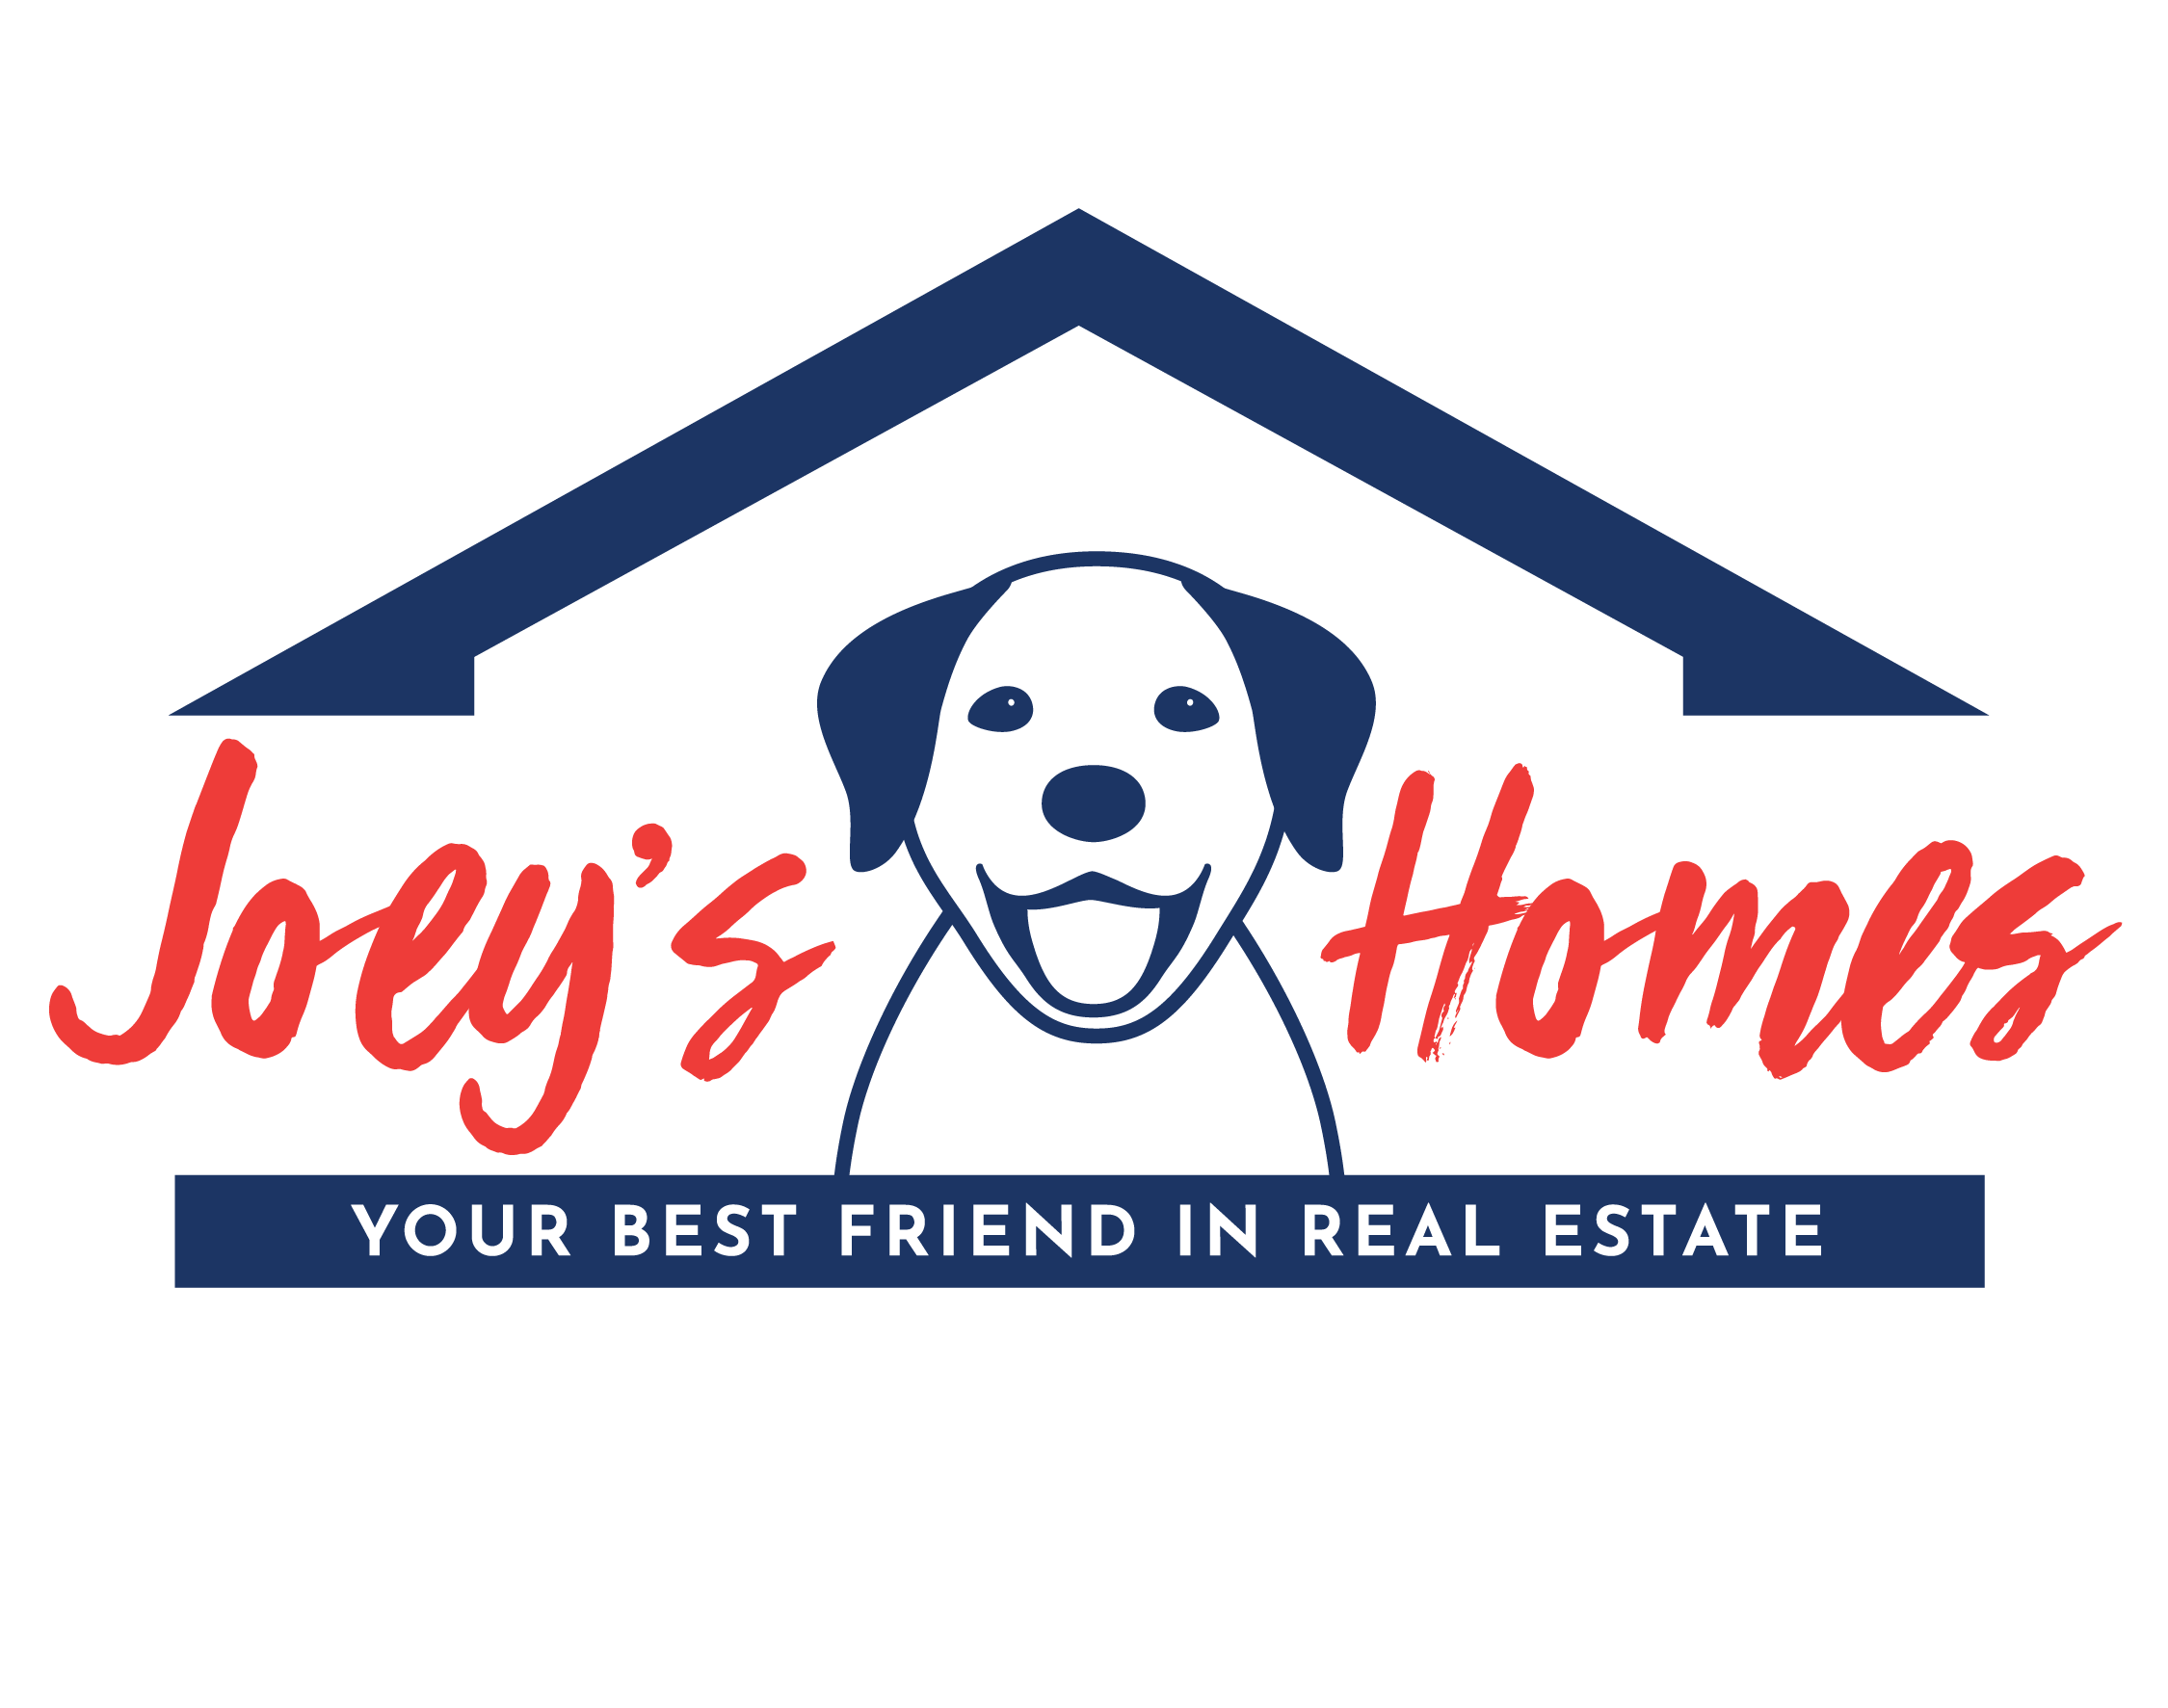 Joeys Homes specializes in Bartow County, GA real estate